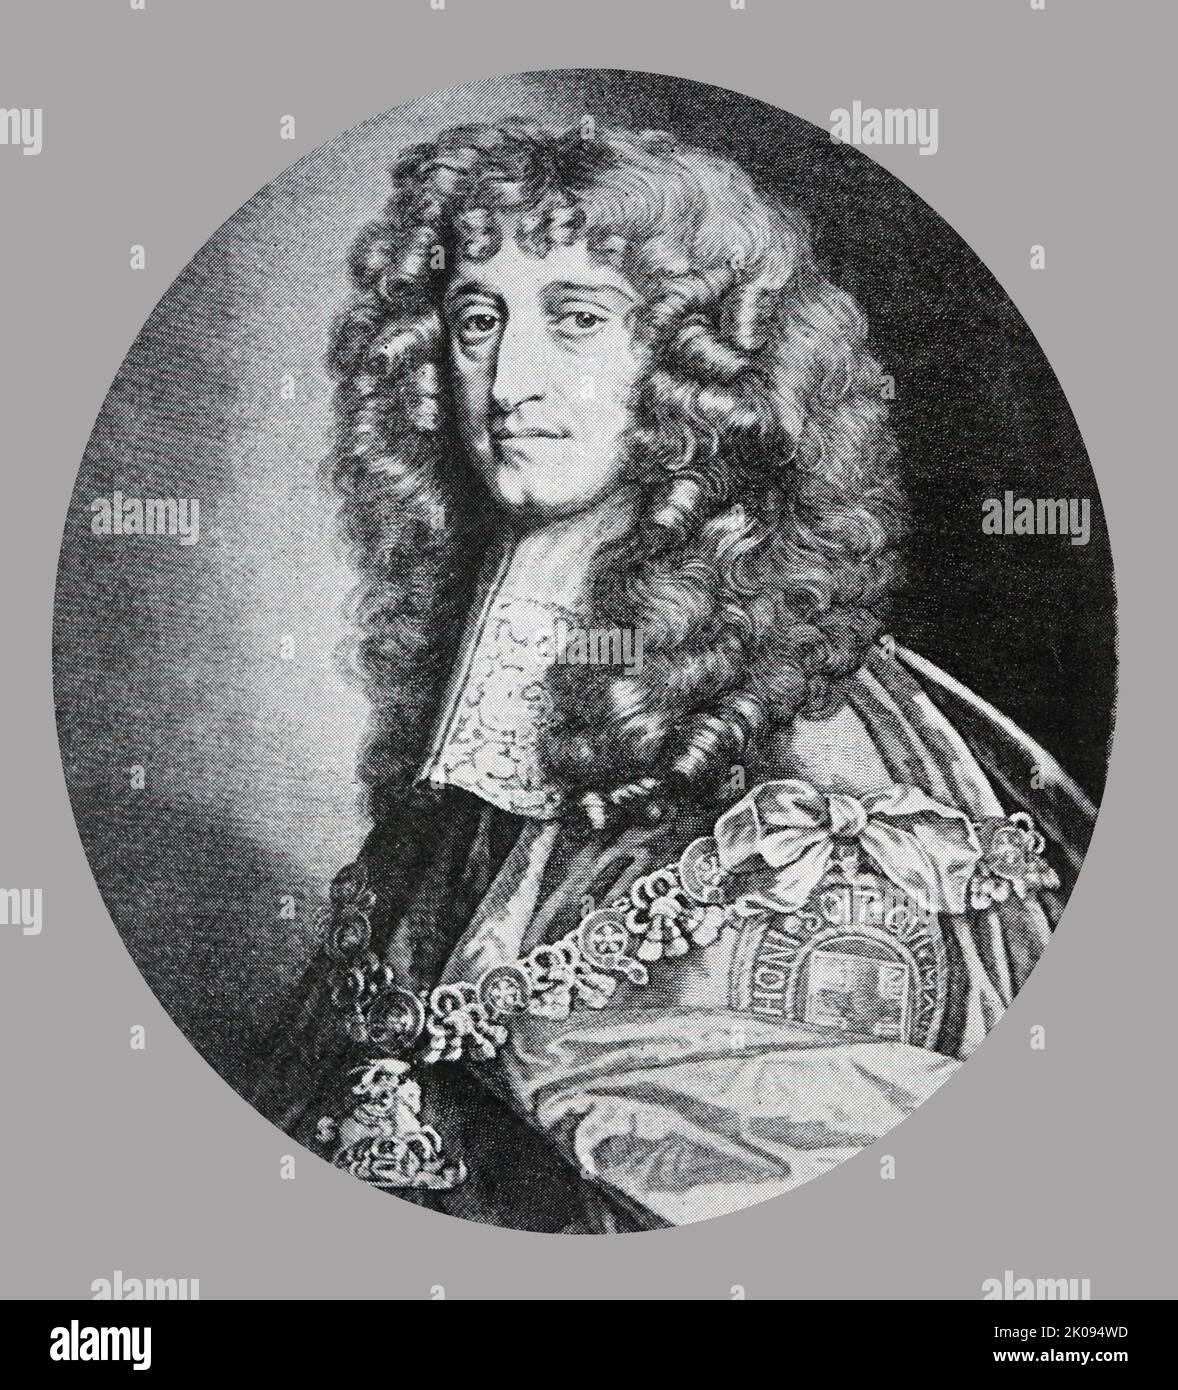 Prince Rupert, from a painting by Lely. Prince Rupert of the Rhine, Duke of Cumberland, KG, PC, FRS (17 December 1619 - 29 November 1682) was a German-English army officer, admiral, scientist and colonial governor. He first came to prominence as a Royalist cavalry commander during the English Civil War. Stock Photo